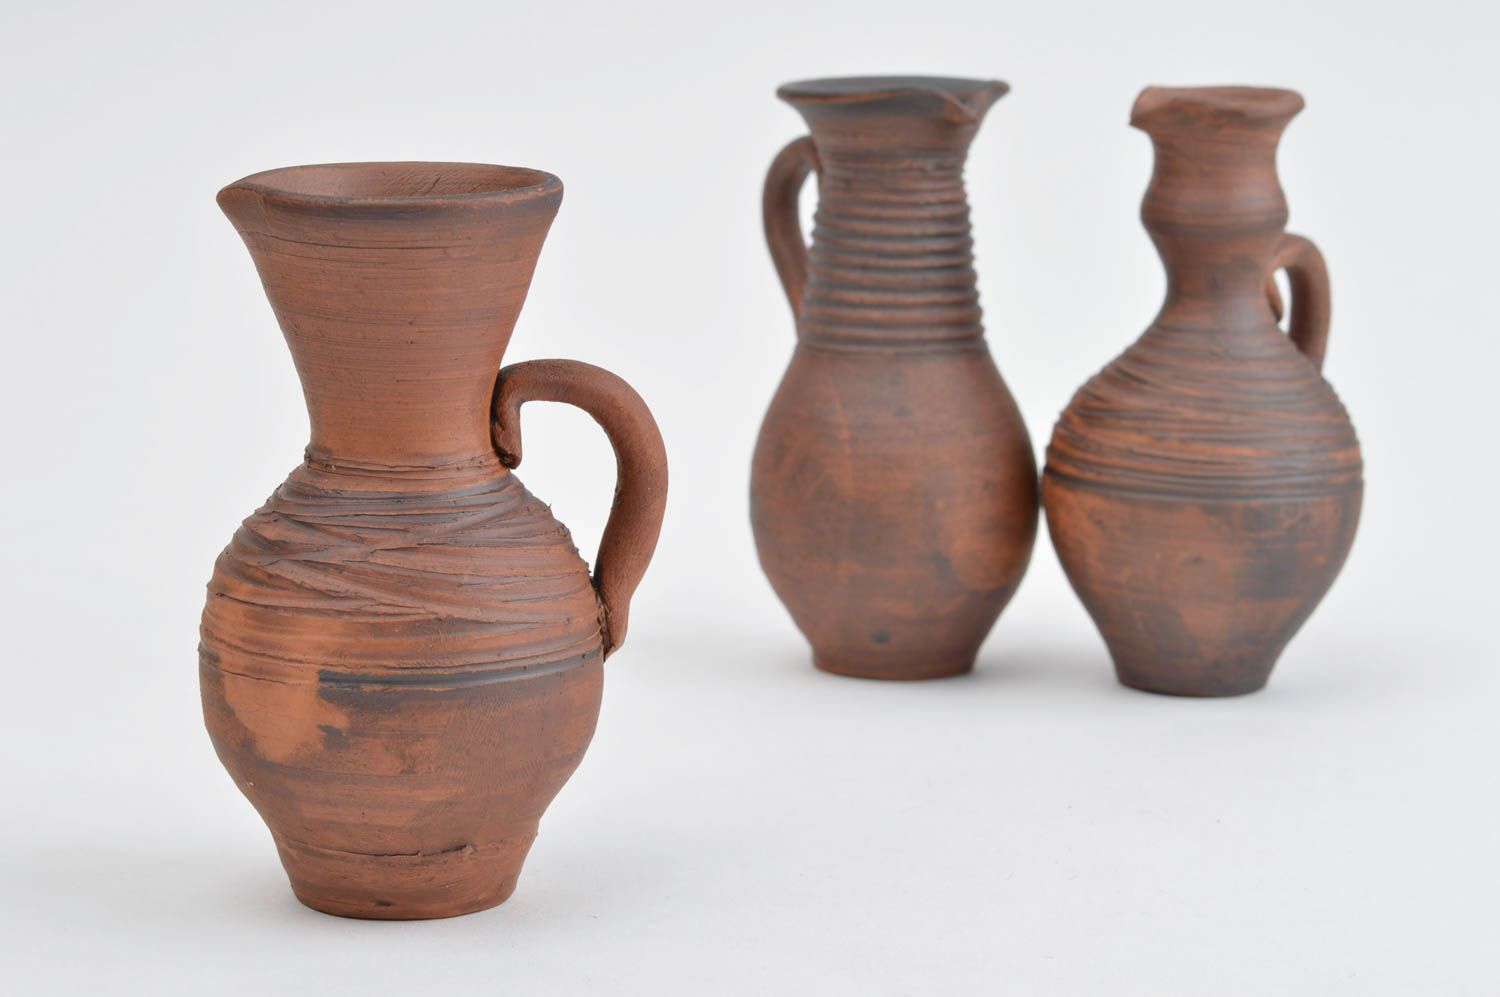 Set of 3 wine brown pitchers in different design with handles and simple patterns 0,5 lb photo 4